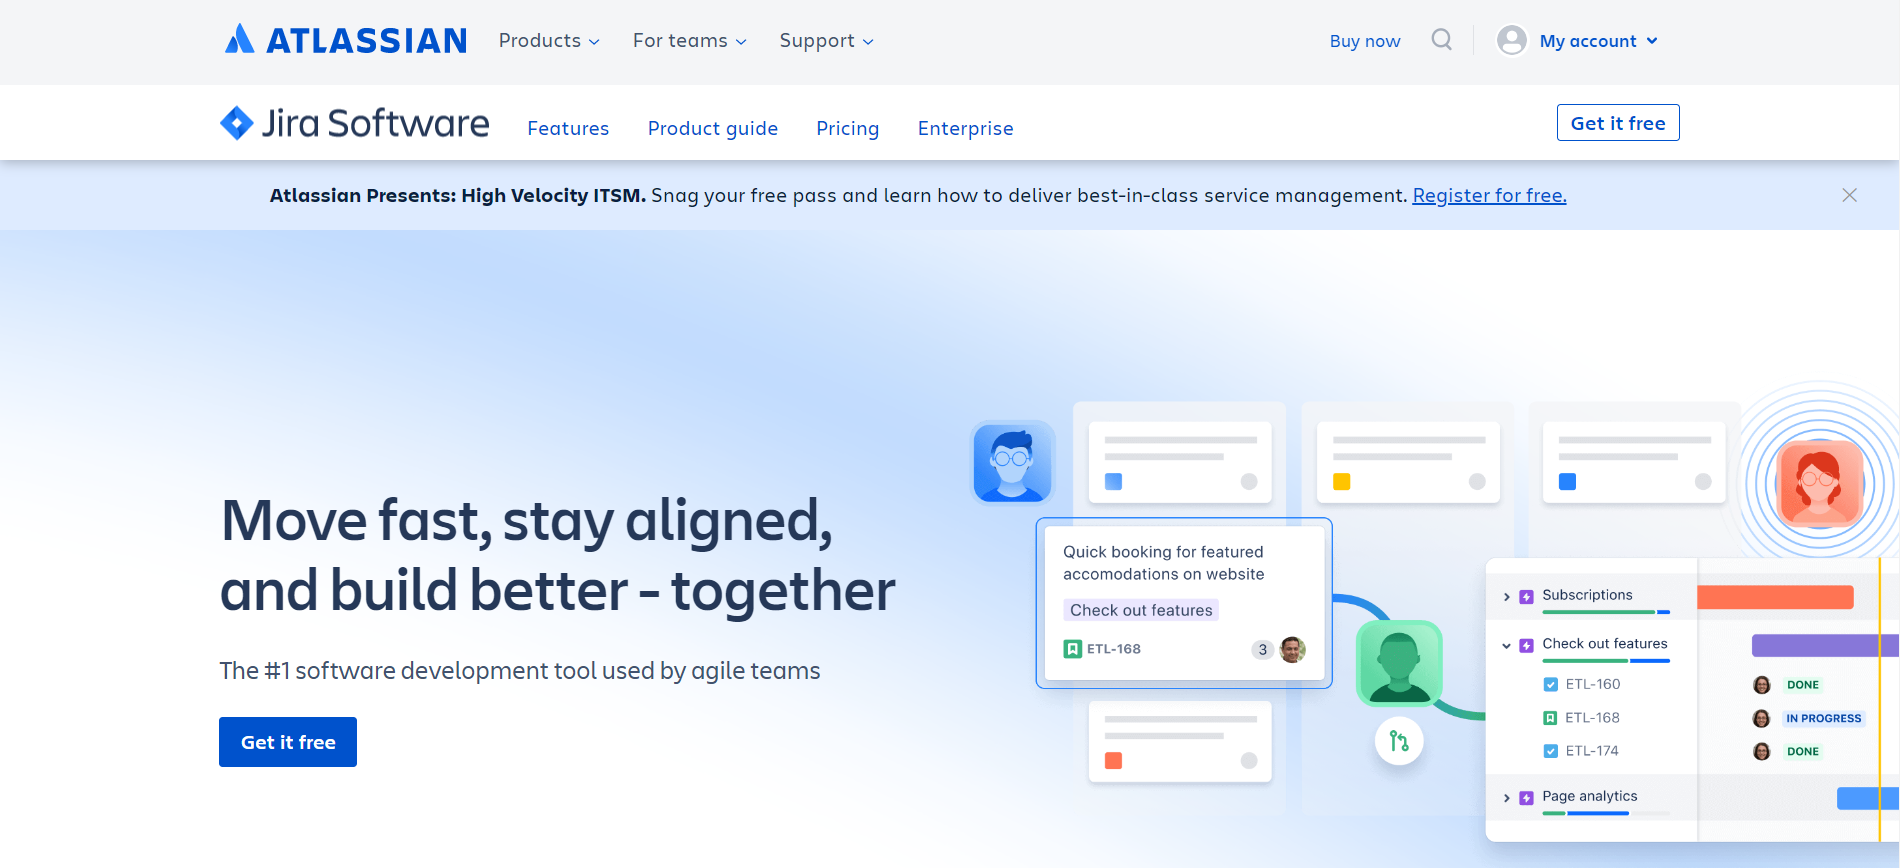 Jira as a task management tool